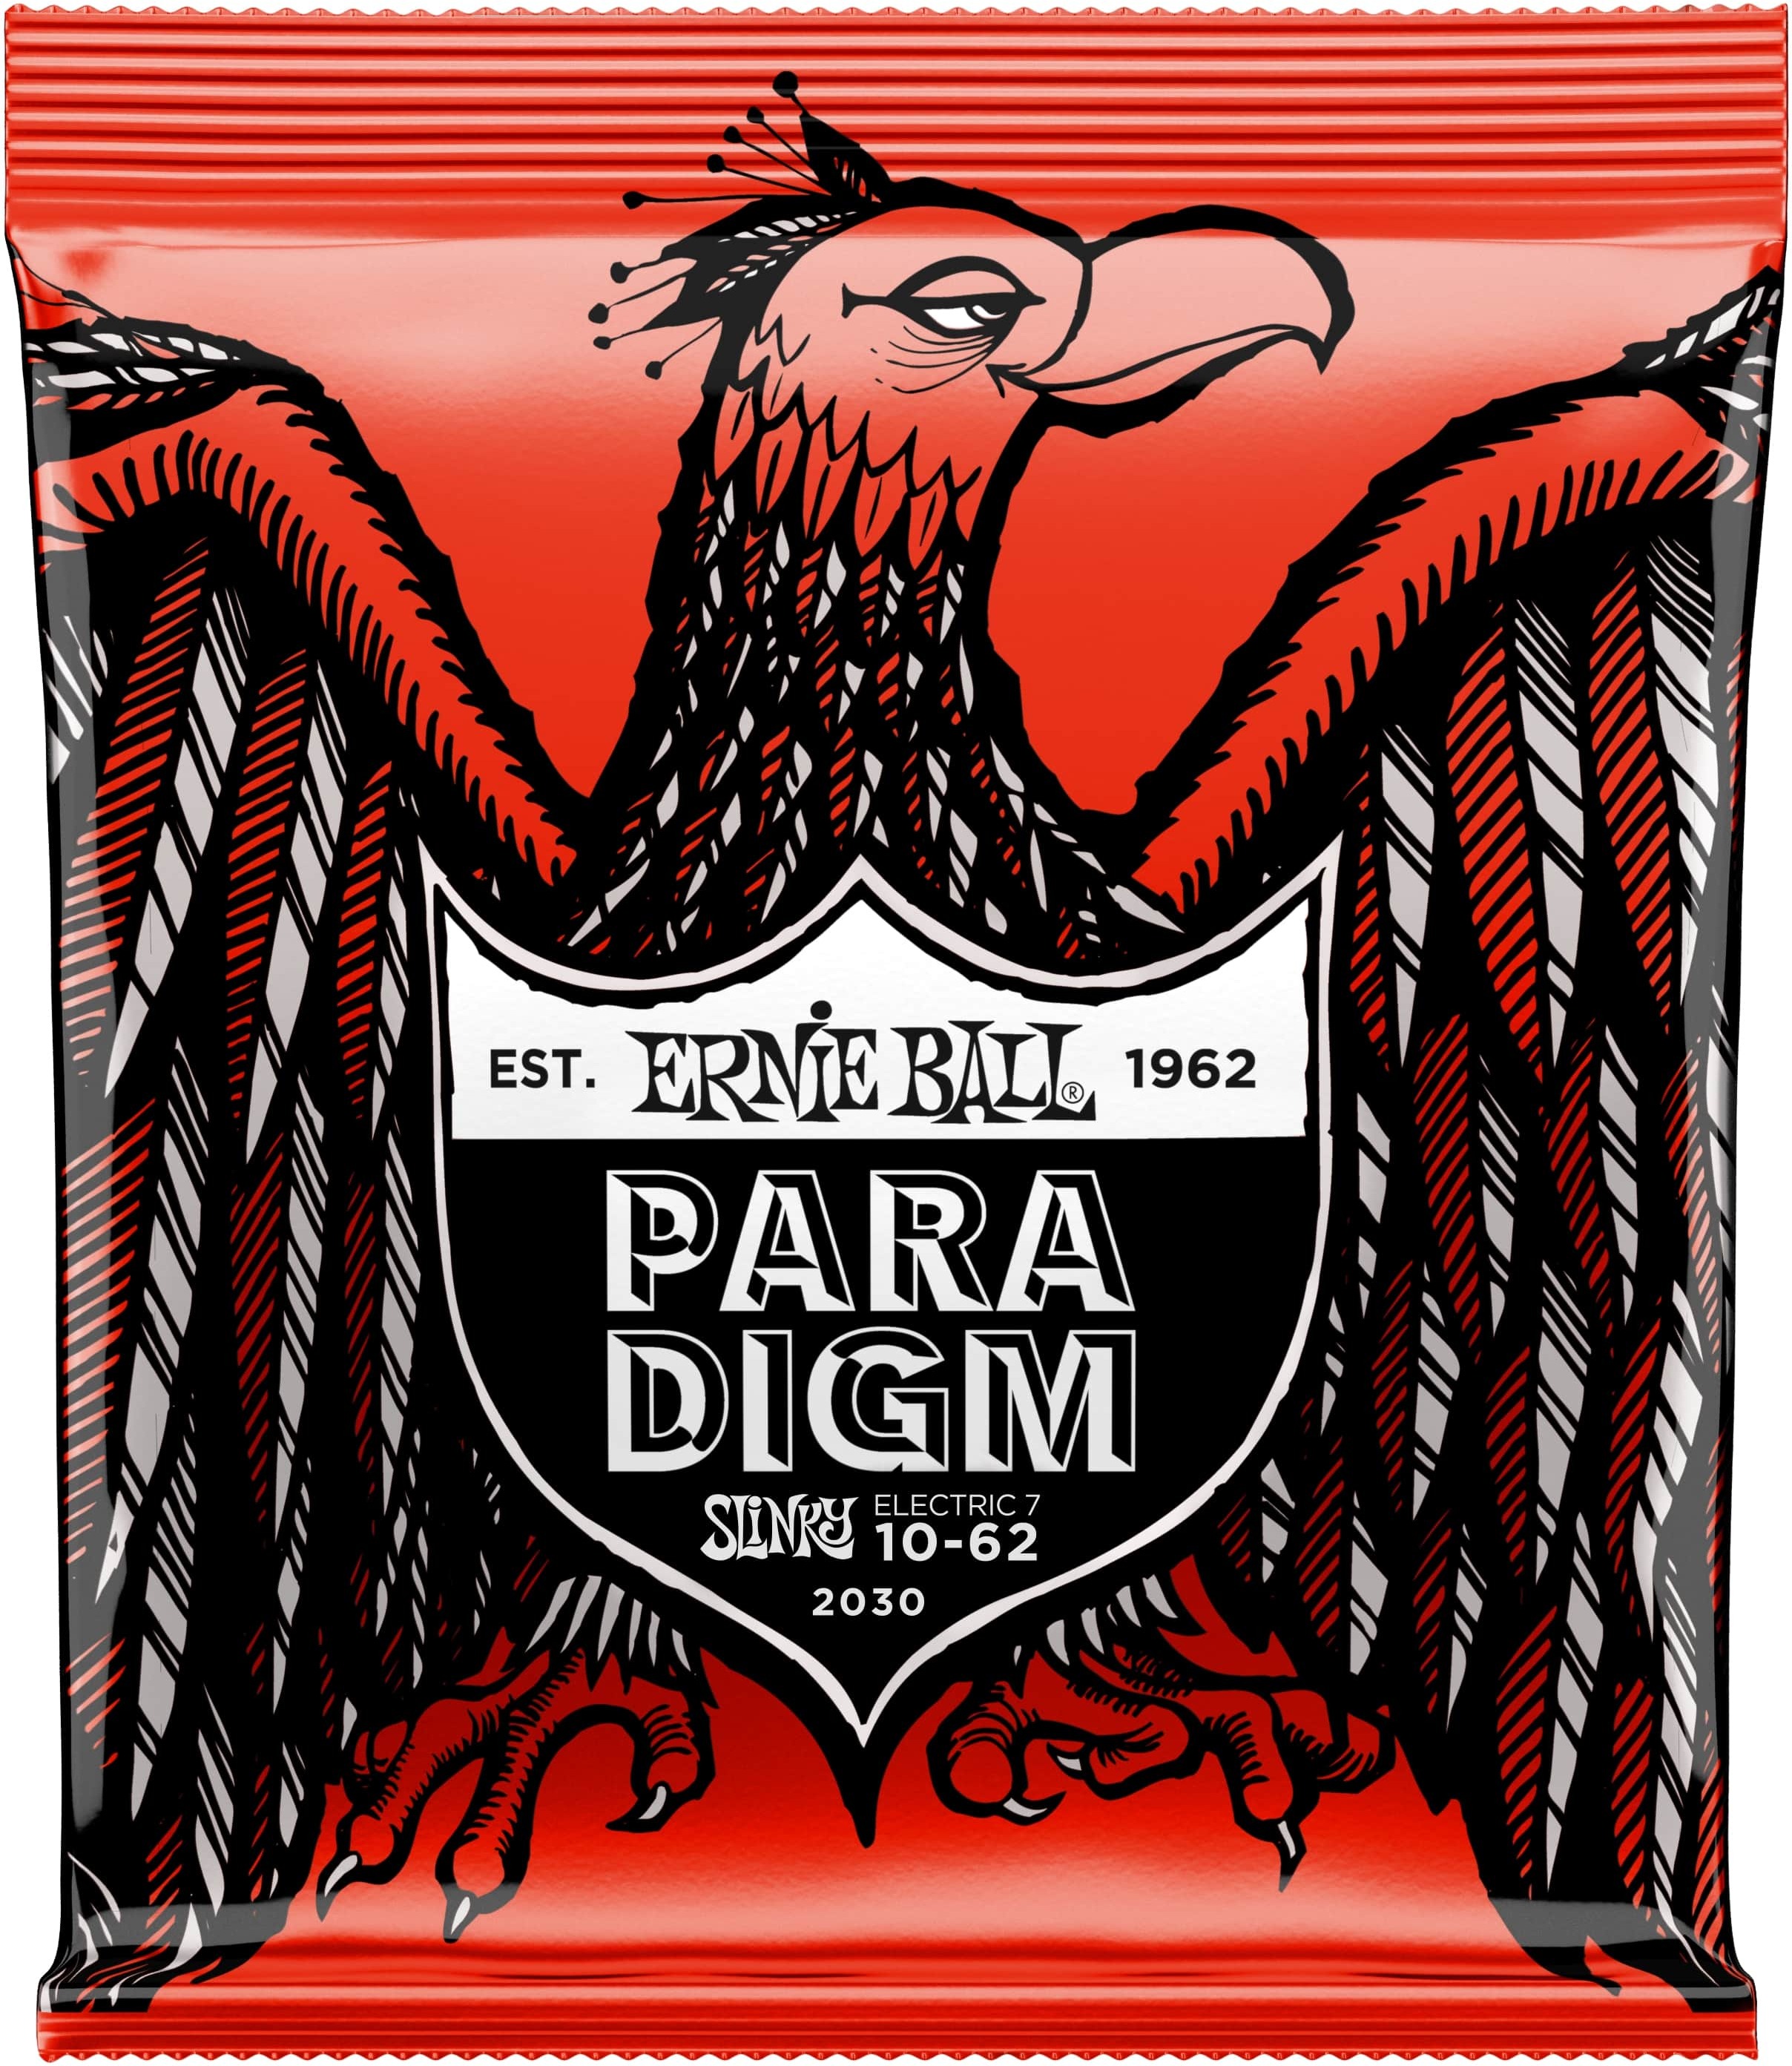 Ernie Ball P02030 7-string Paradigm Sthb Slinky Electric Guitar 7c 10-62 - Electric guitar strings - Main picture